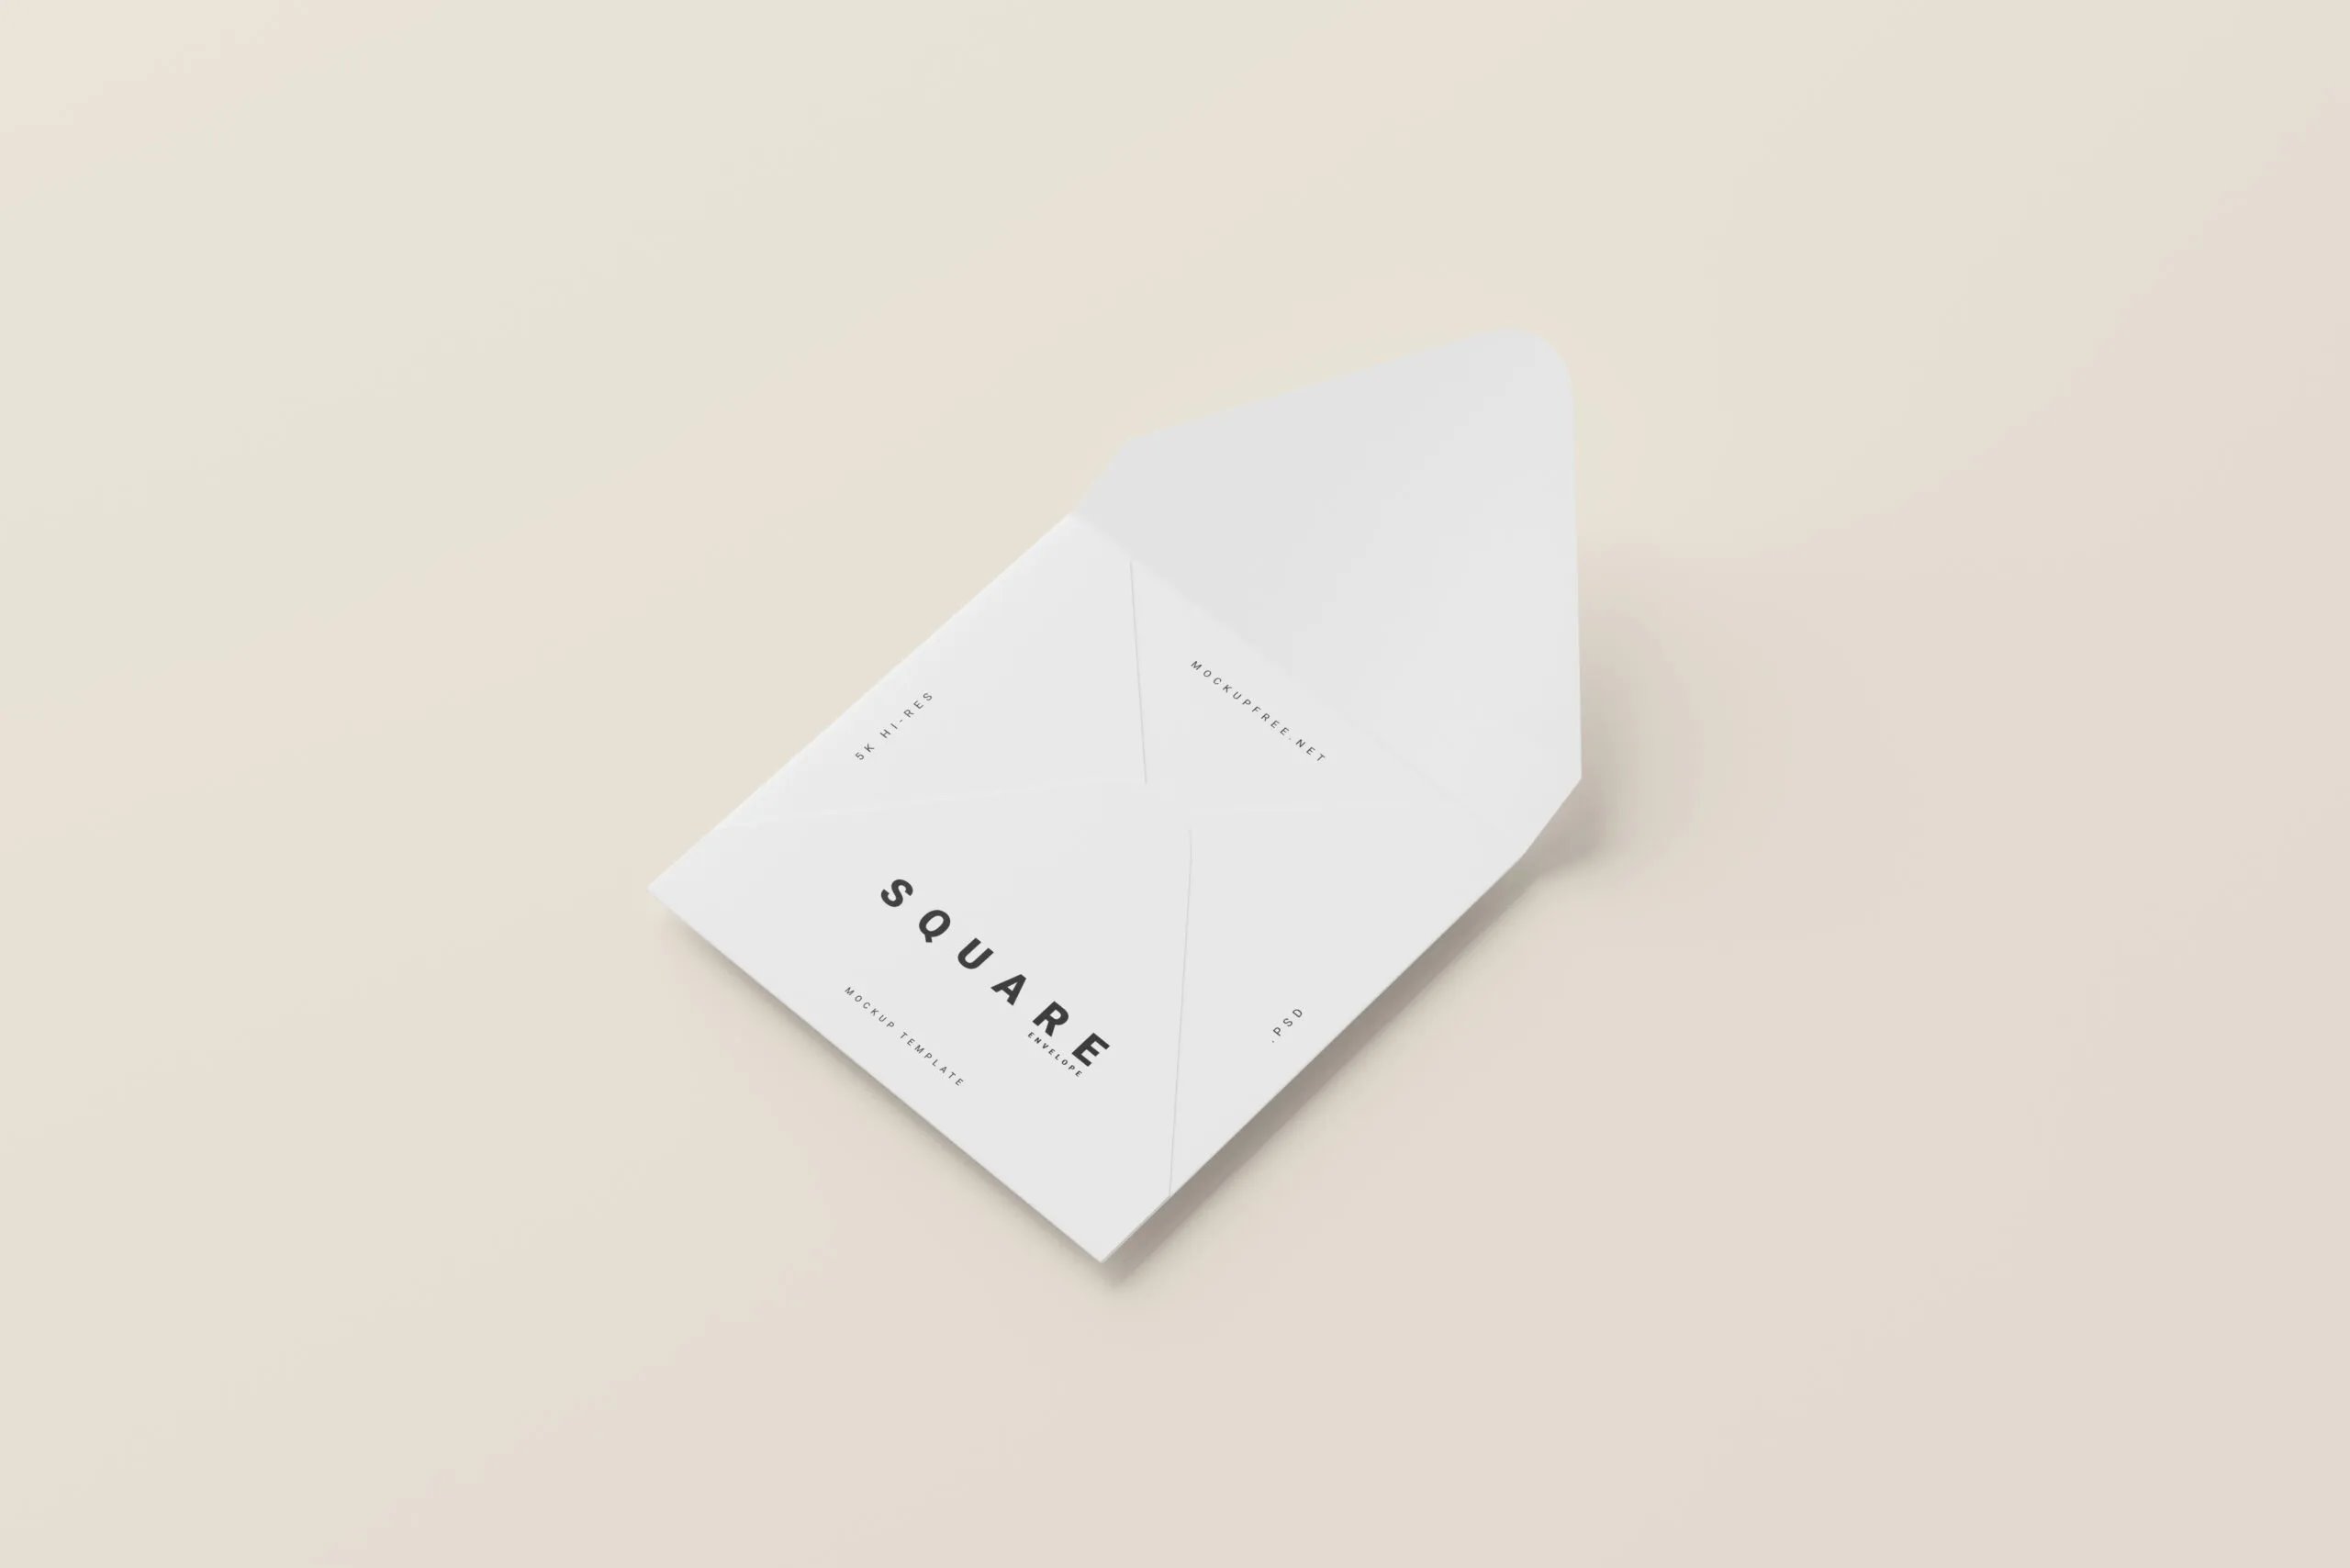 5 Square Envelopes Mockups in Perspective Visions FREE PSD